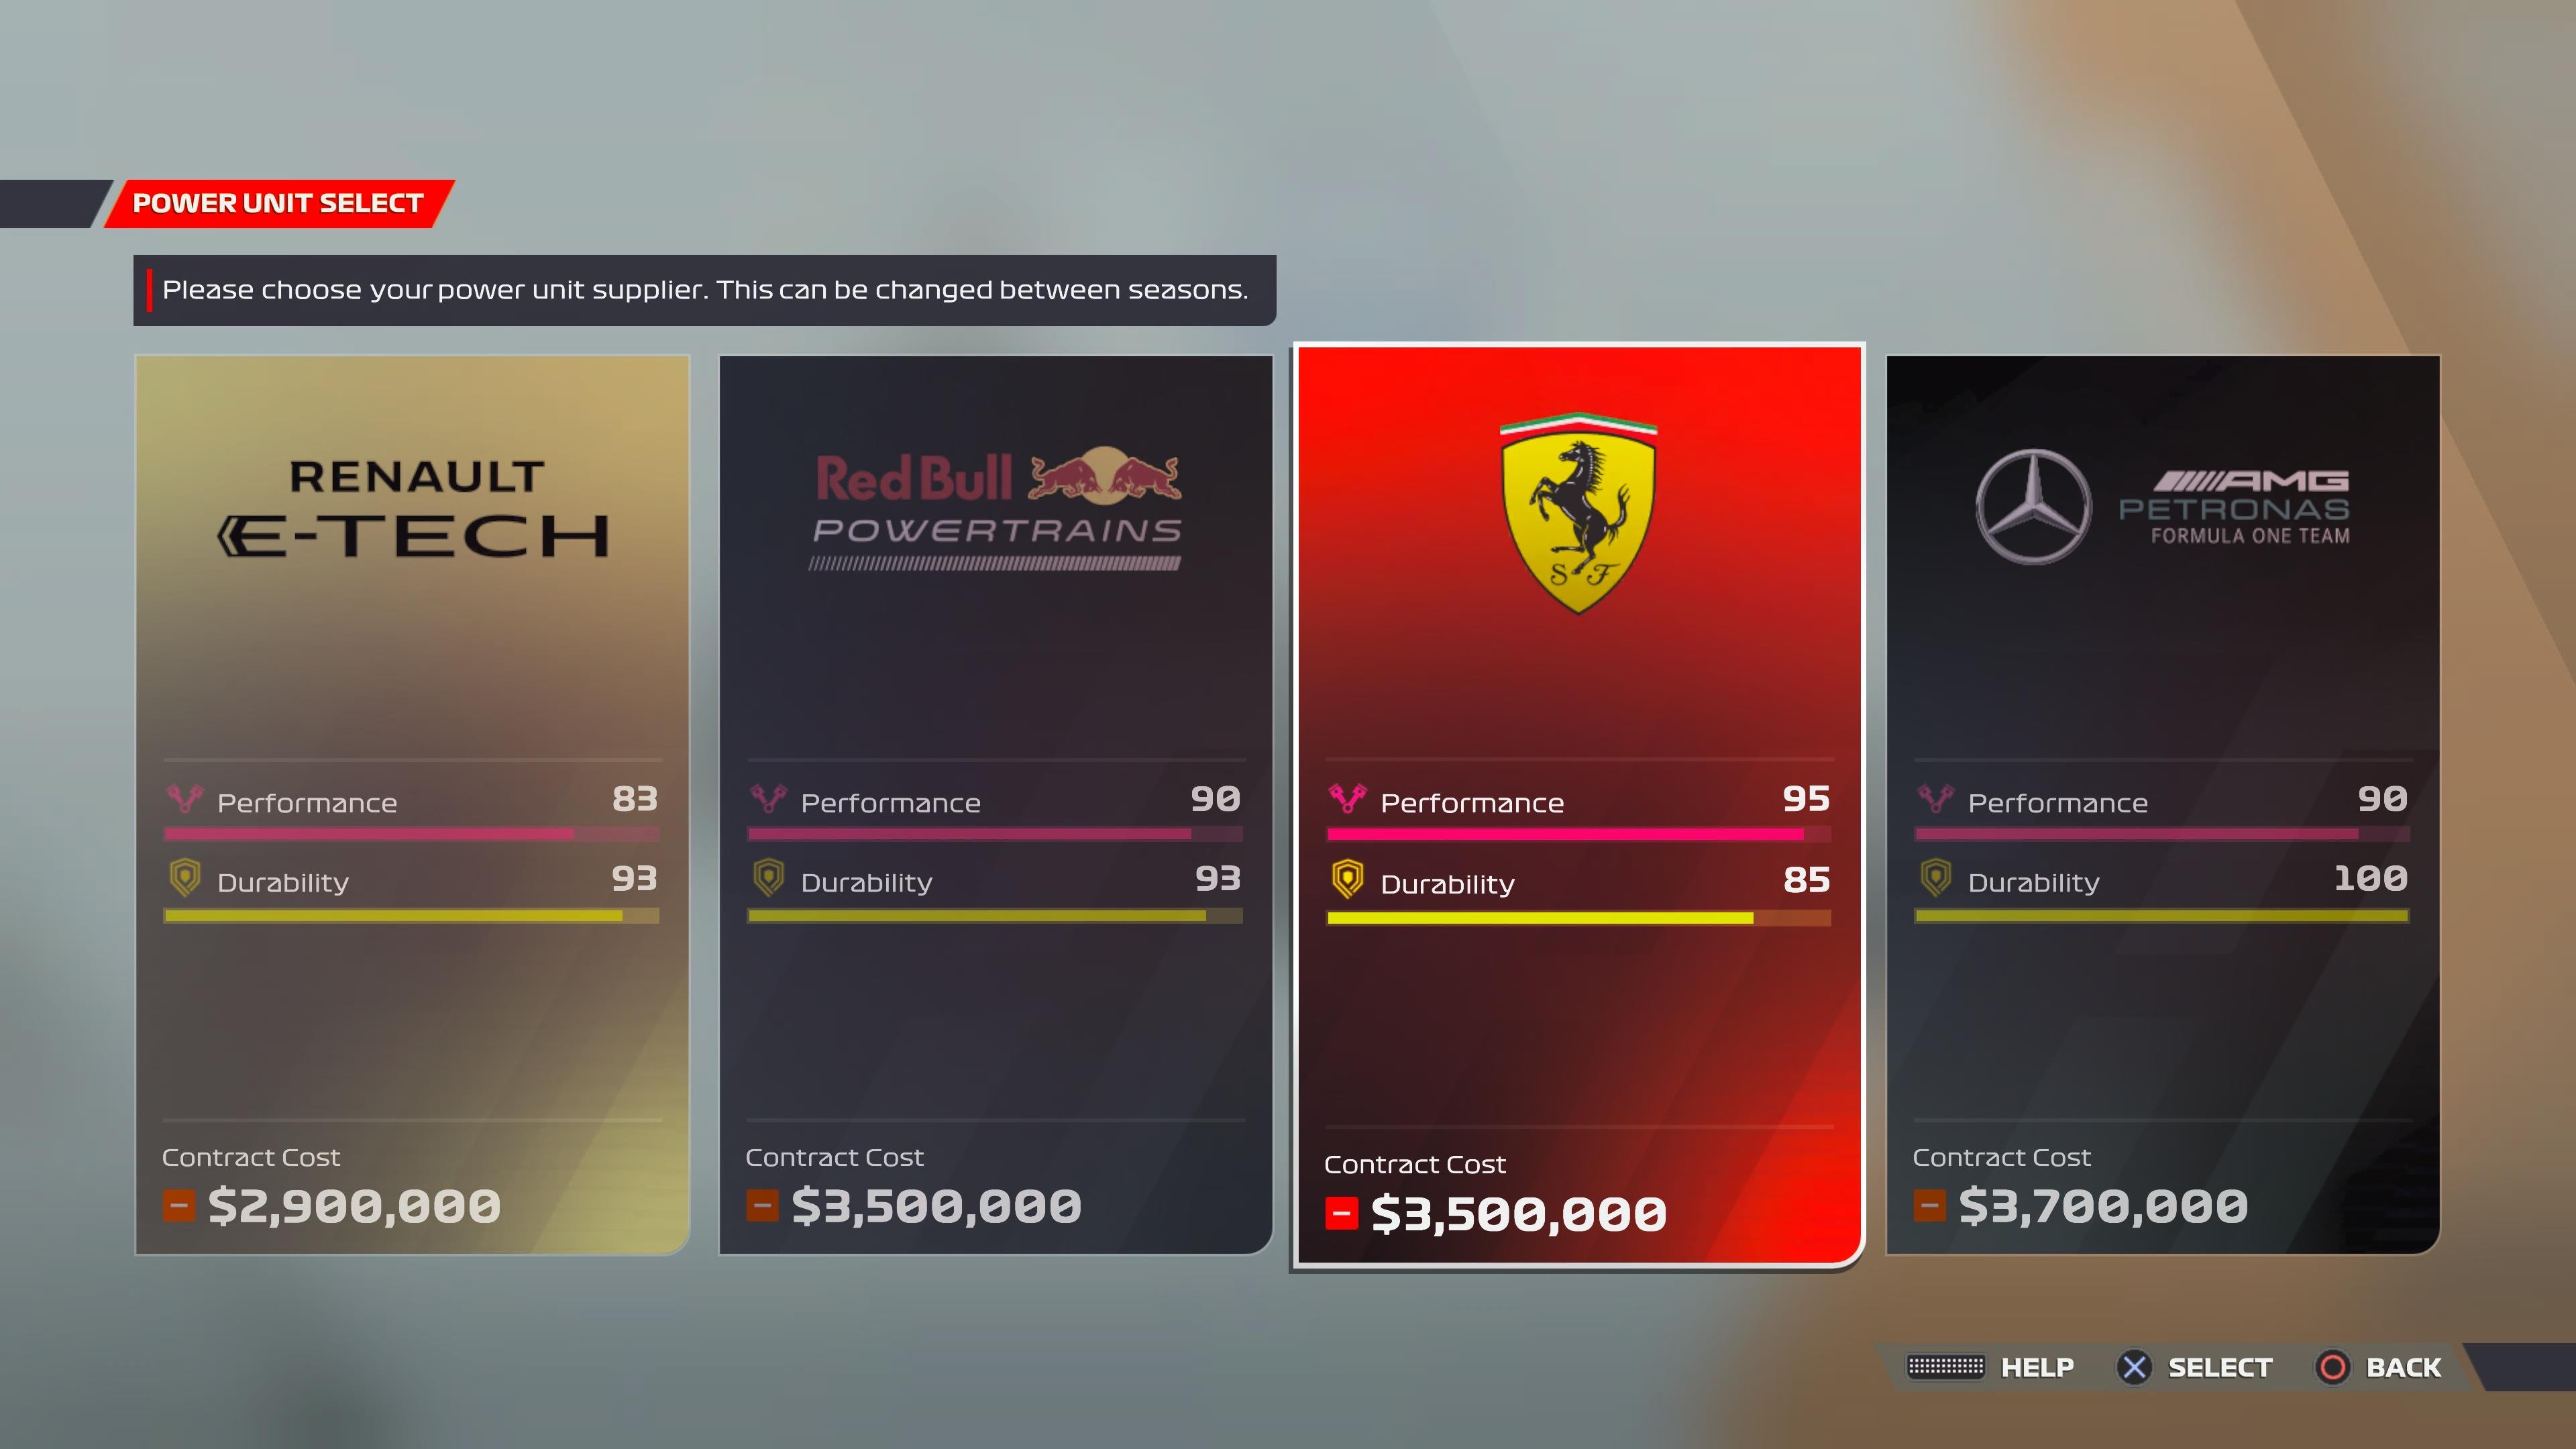 F1 23 Achievement and Trophy List: All F1 23 achievements and